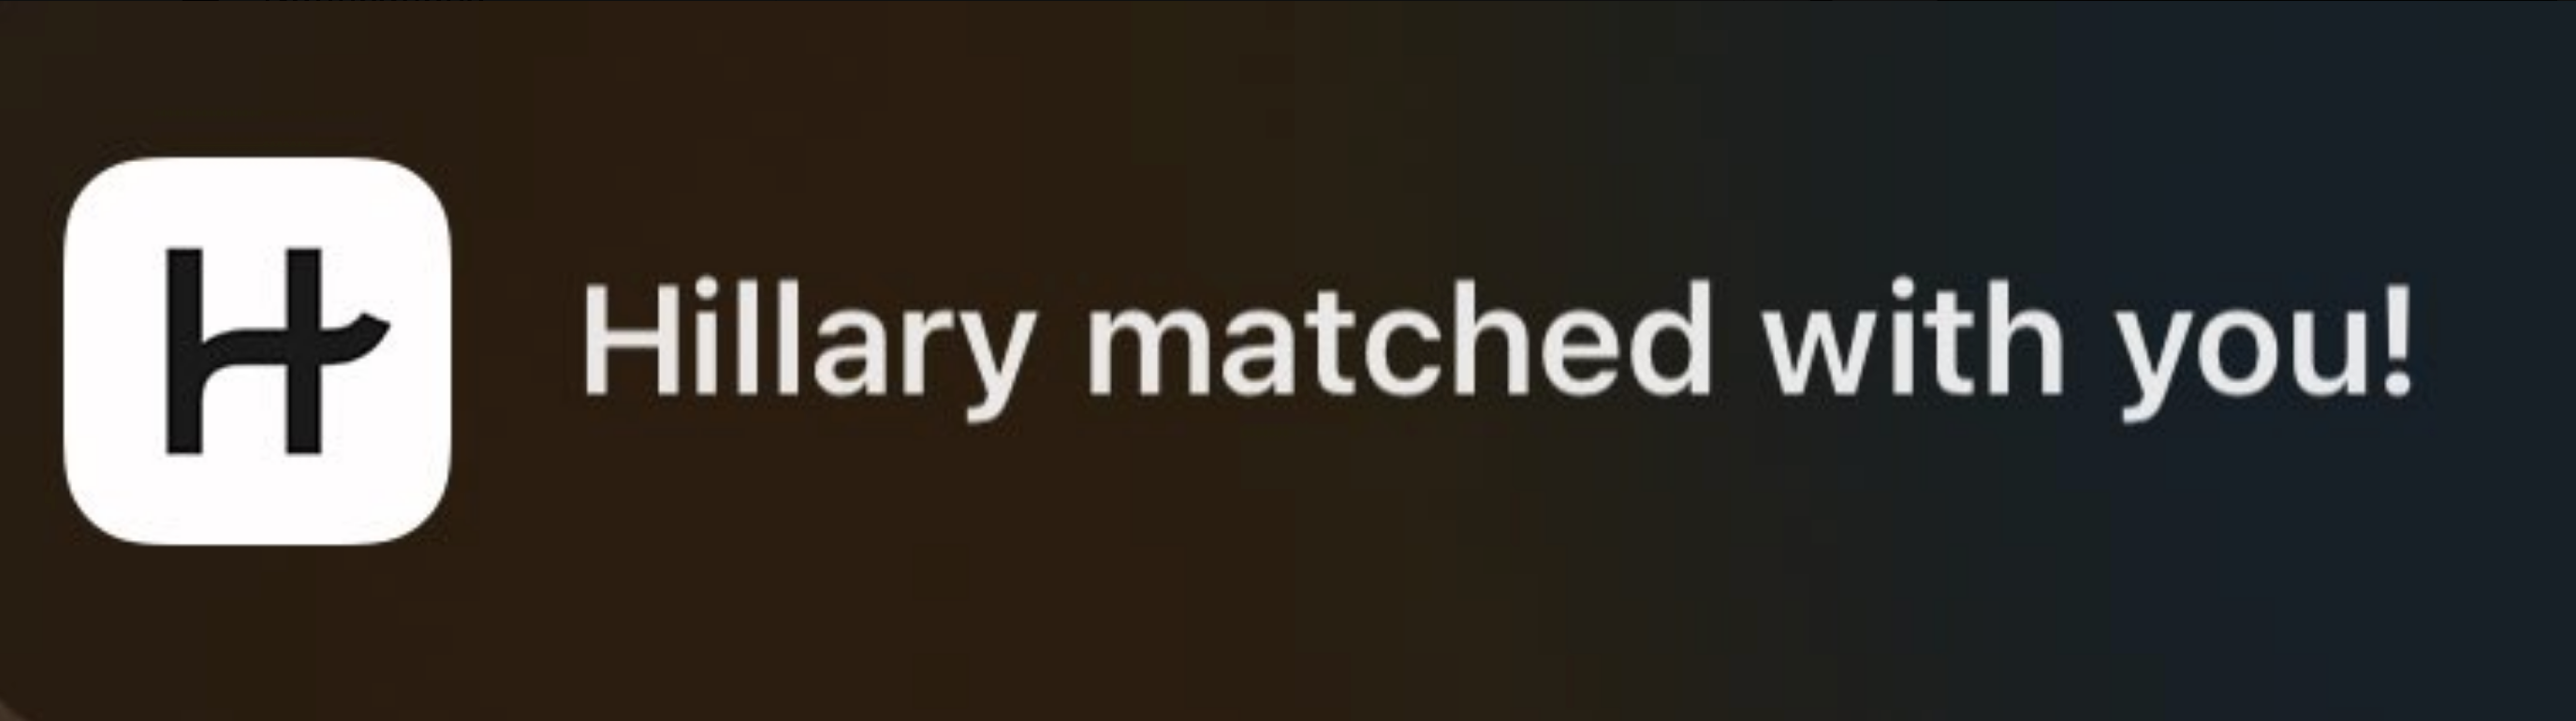 Notification from a dating app showing a match with Hillary